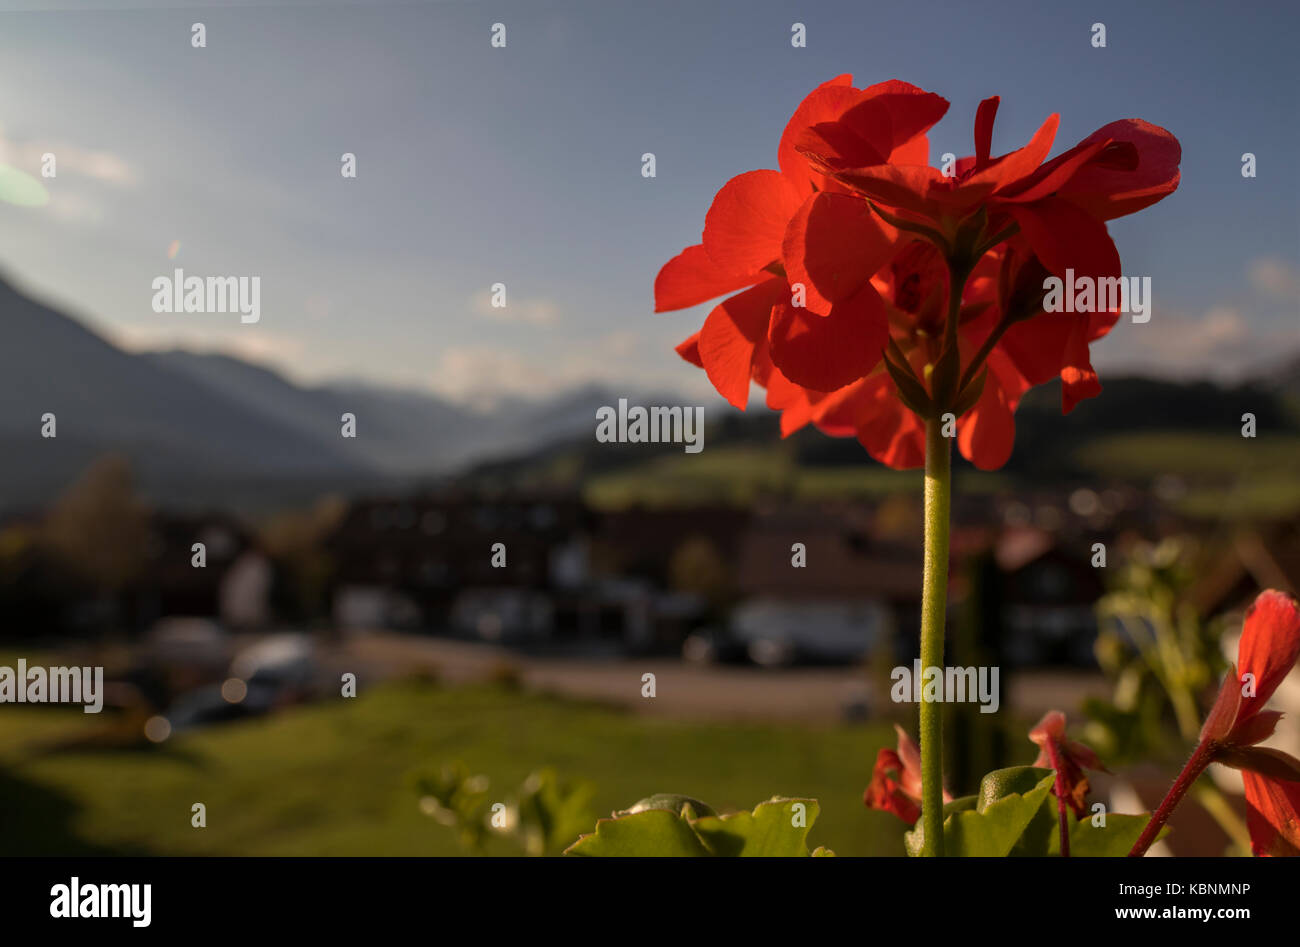 A red geranium flower, very typical in Bavaria with mountains in the backround Stock Photo